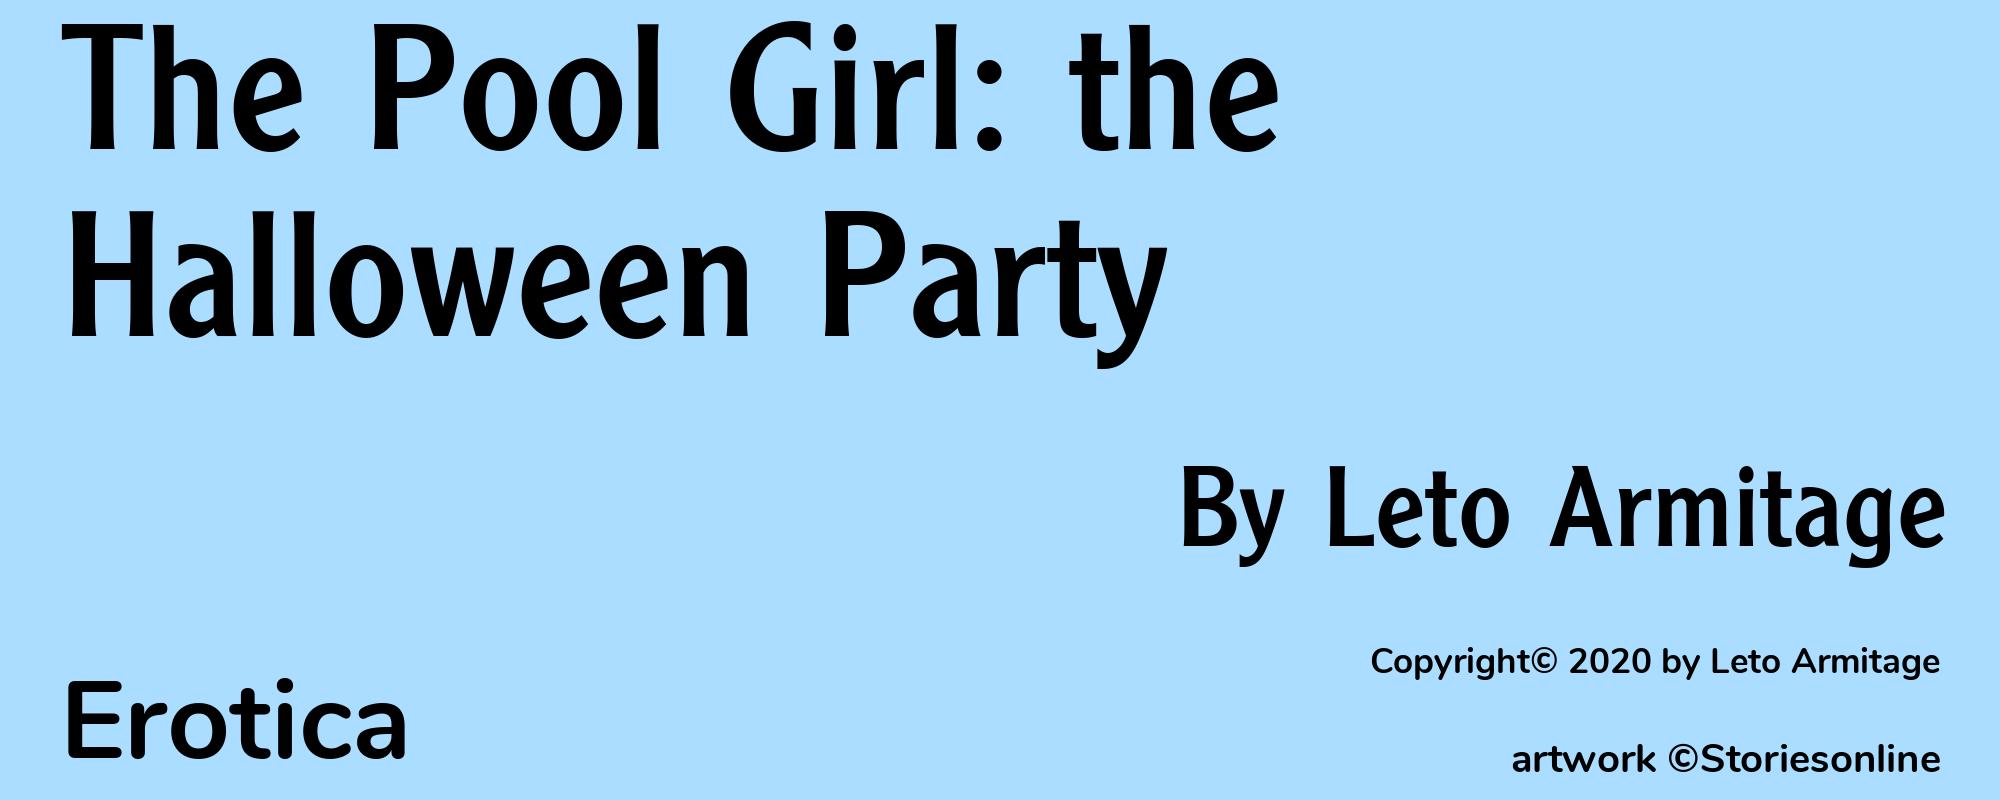 The Pool Girl: the Halloween Party - Cover